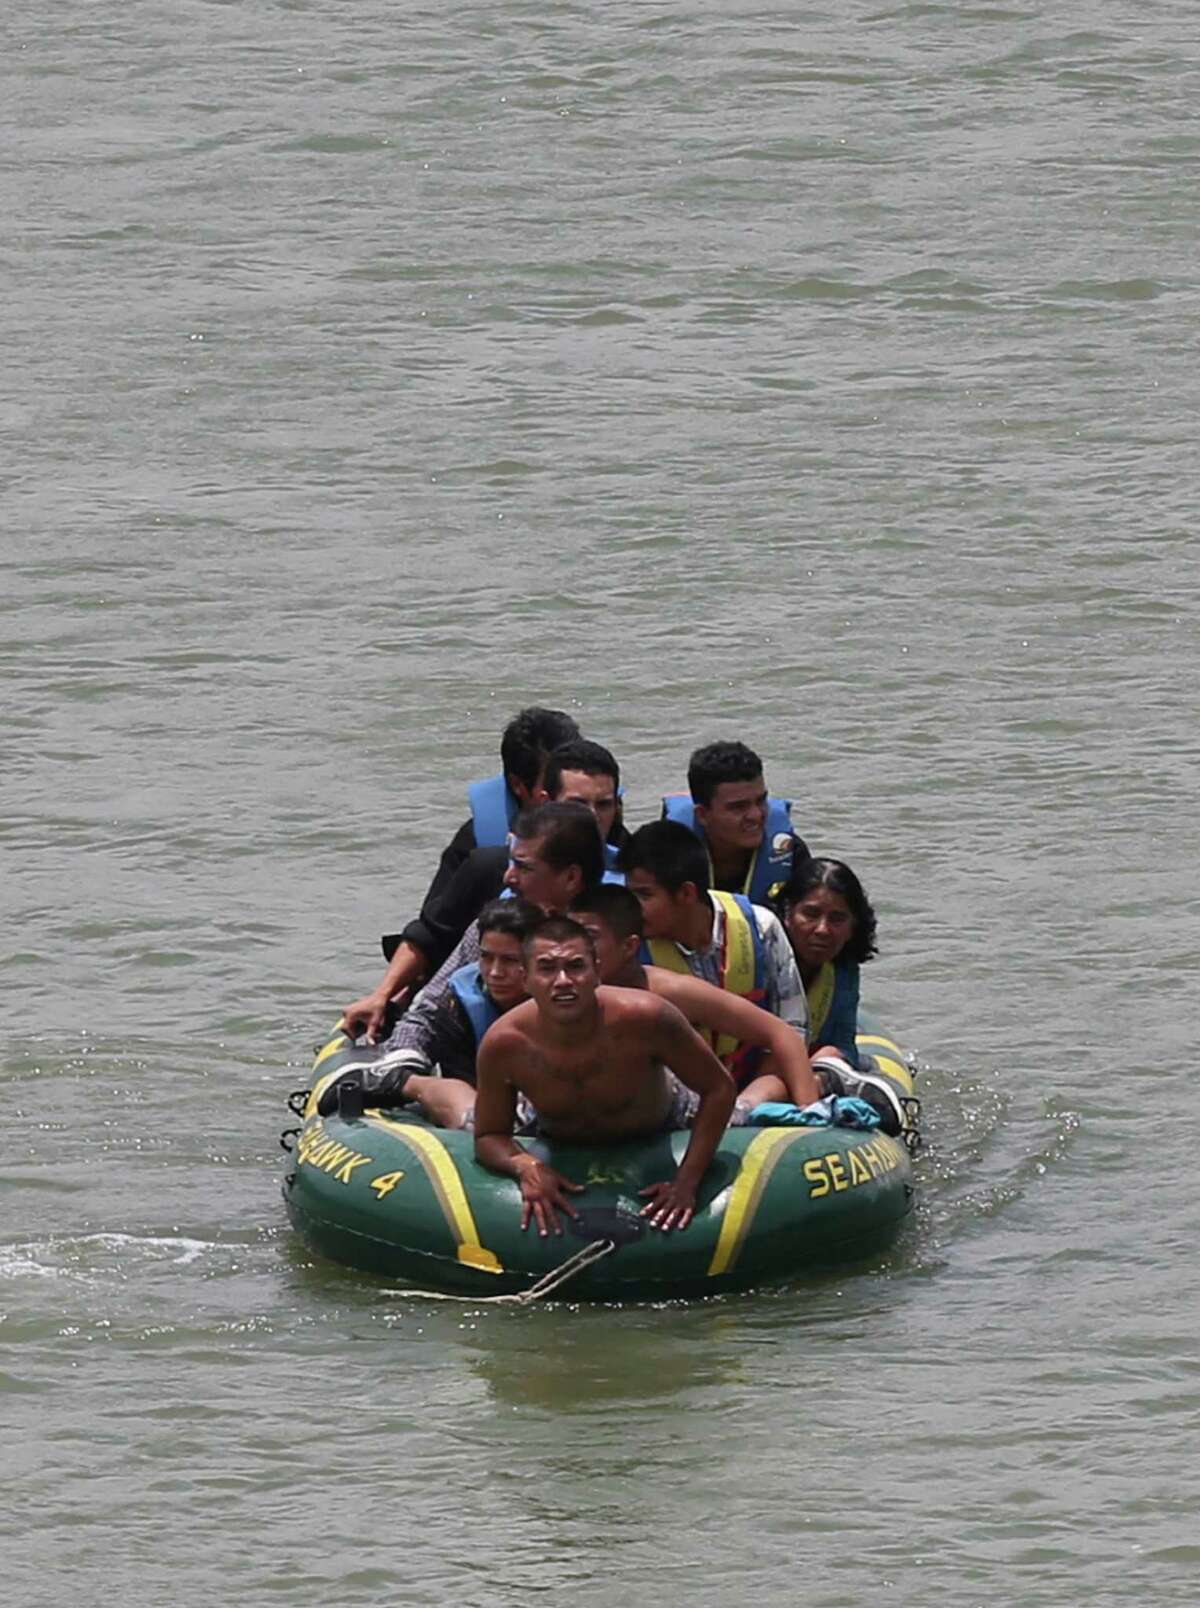 Using an inflatable raft, coyotes, or smugglers, move immigrants across the Rio Grande near the international bridge in Roma, Texas. A wave of Central American immigrant families and unaccompanied minors are entering the U.S. through the Rio Grande Valley south of Roma. This has caused law enforcement agencies to concentrate agents in the in that area. Higher risk smuggling operations have moved into Starr County in order to avoid the saturated border in Hidalgo, County.